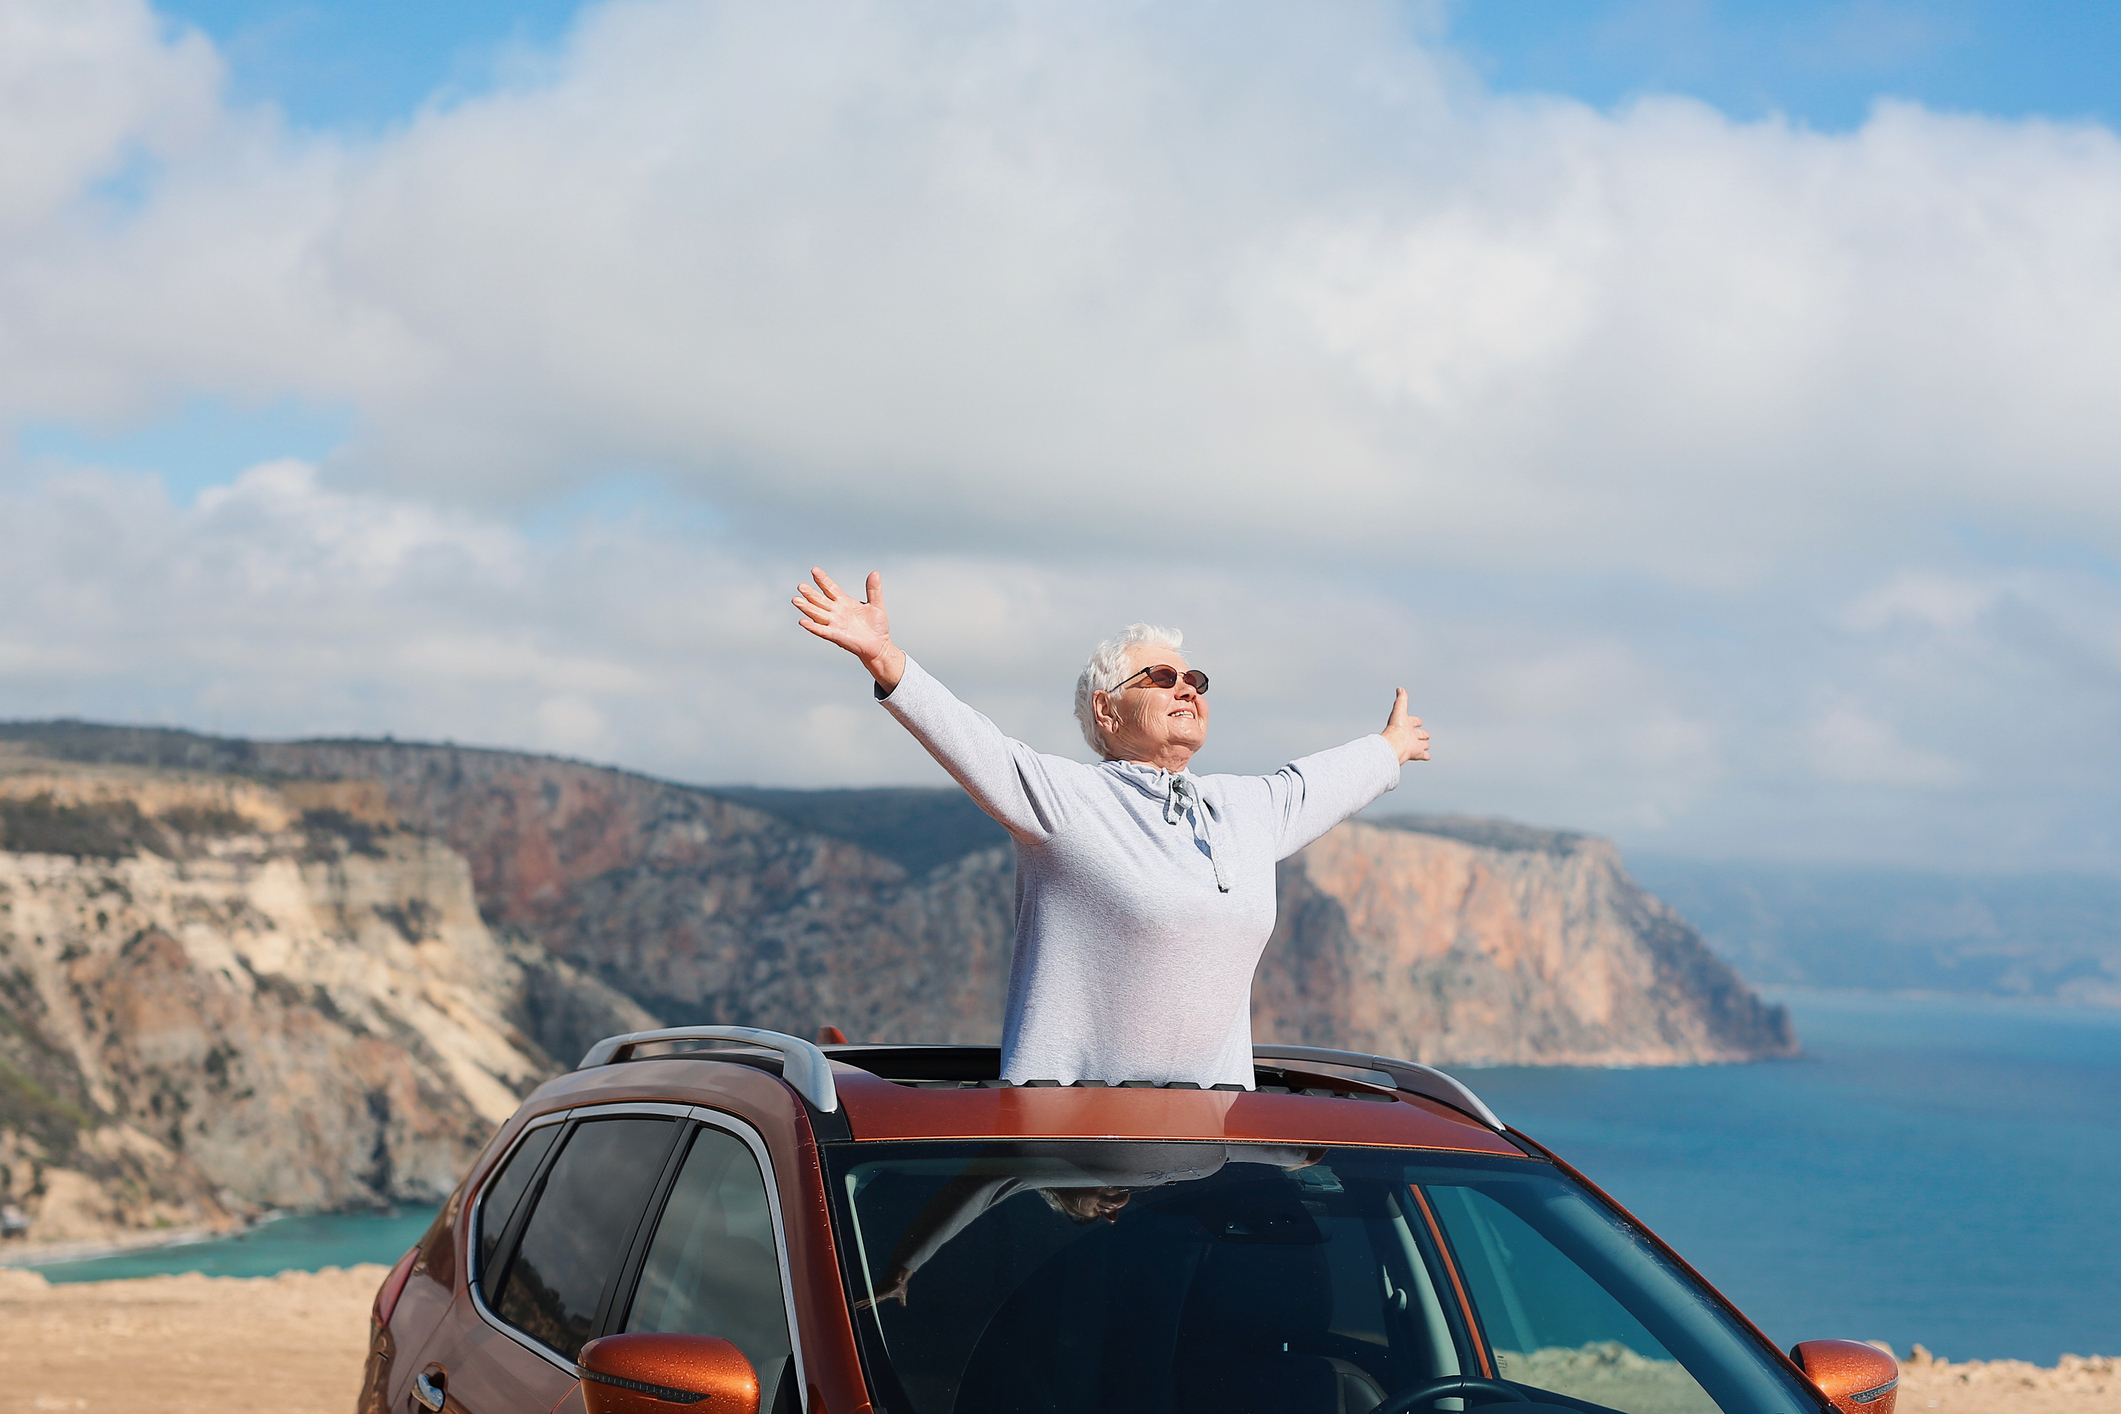 An elderly person stands through a car&#x27;s sunroof with arms outstretched, enjoying a scenic coastal view with cliffs and ocean in the background